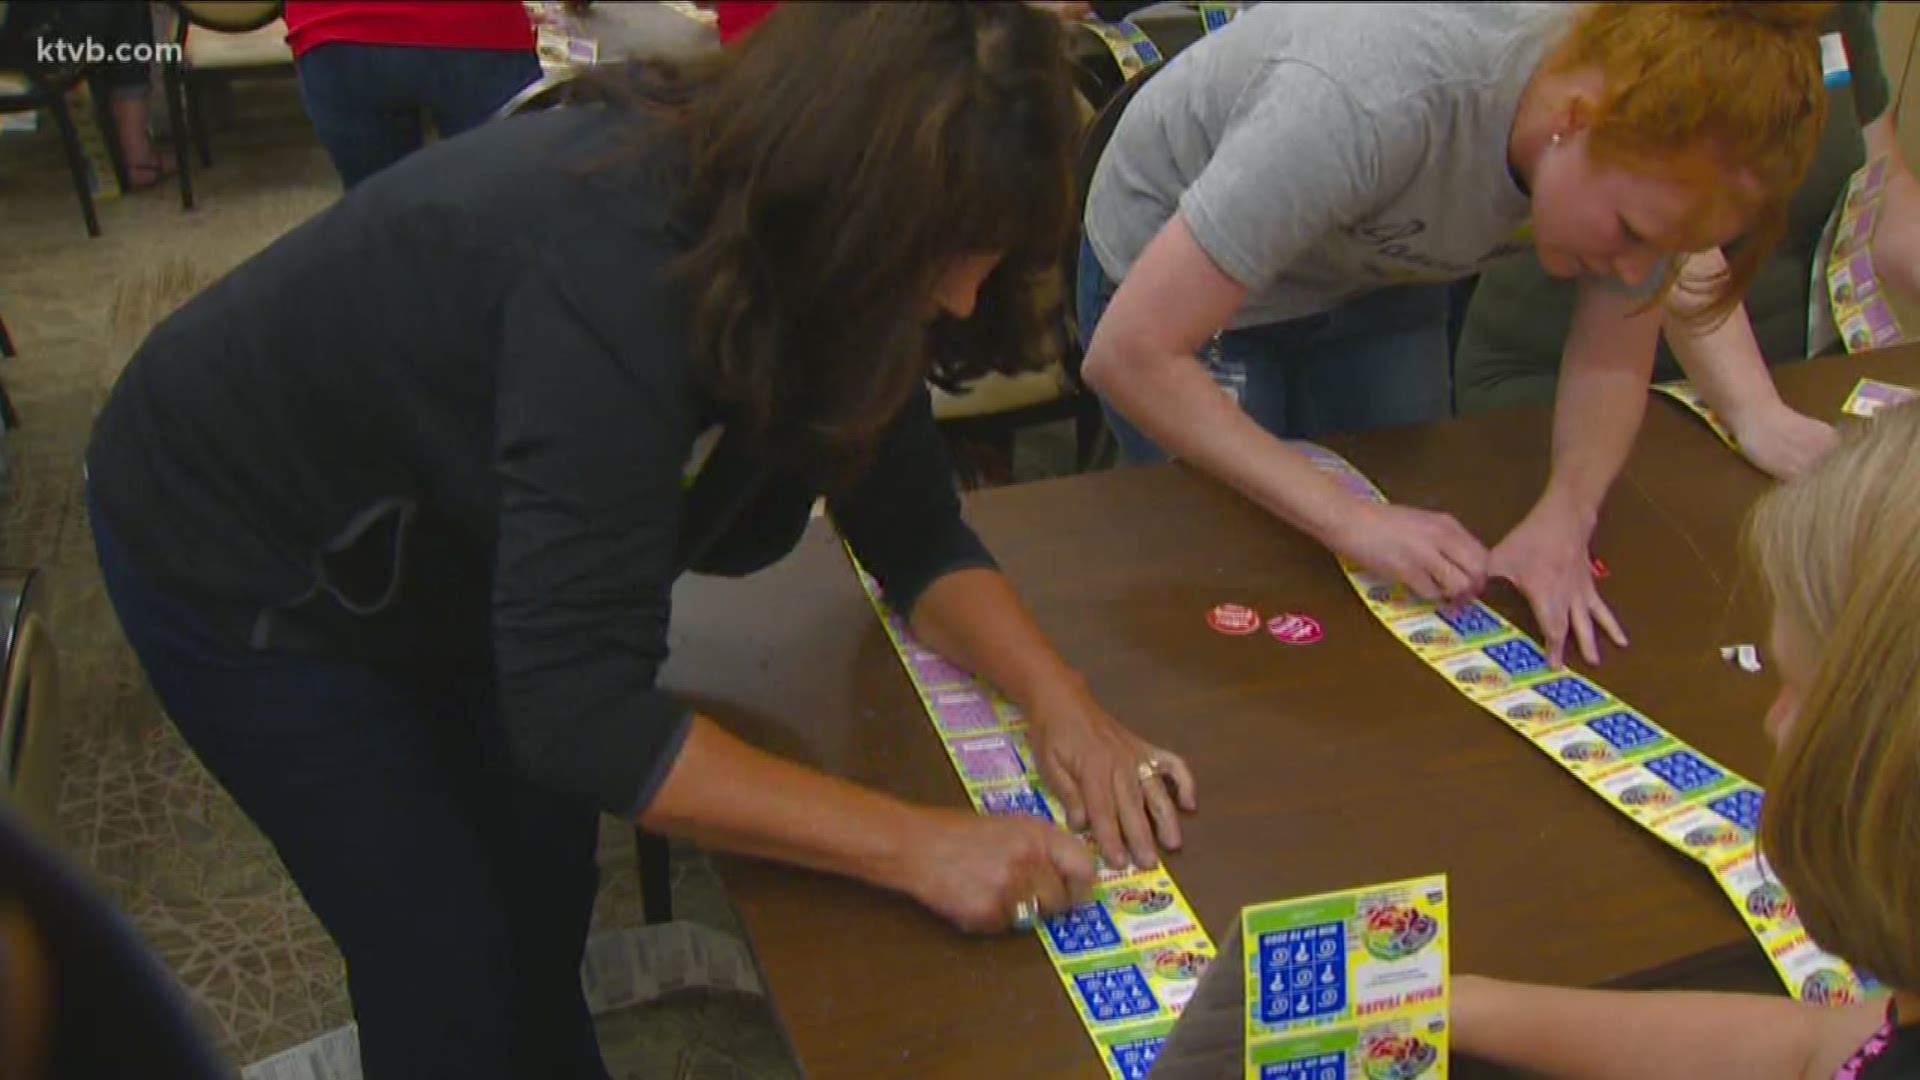 The annual event, hosted by the Idaho Lottery, raised more than $15,000 for local schools.